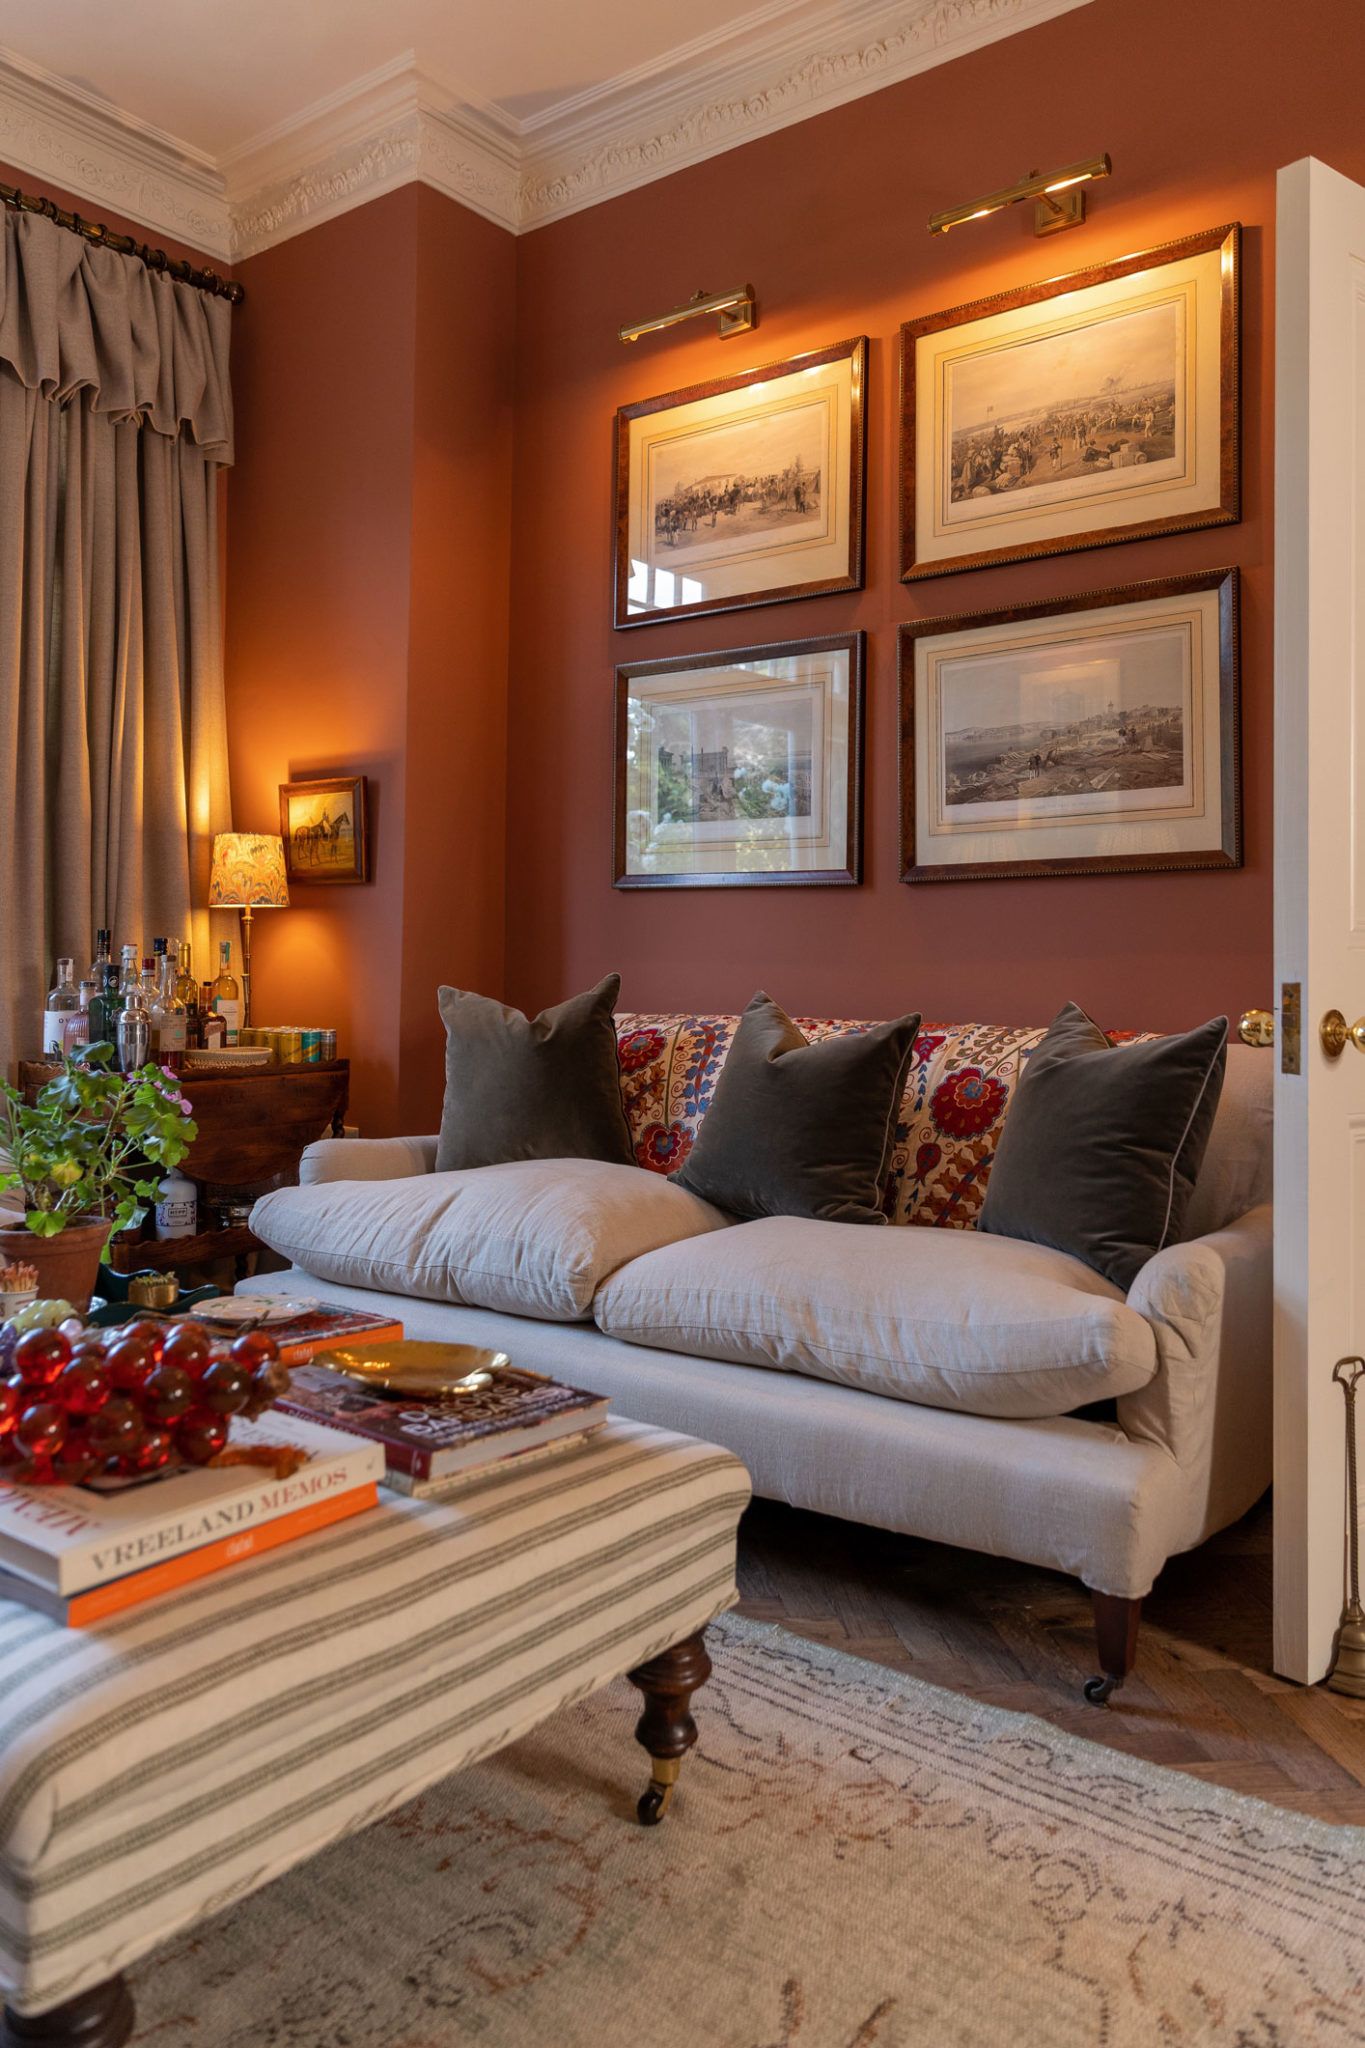 The Impact of Color: Choosing the Perfect
Hues for Your Living Room